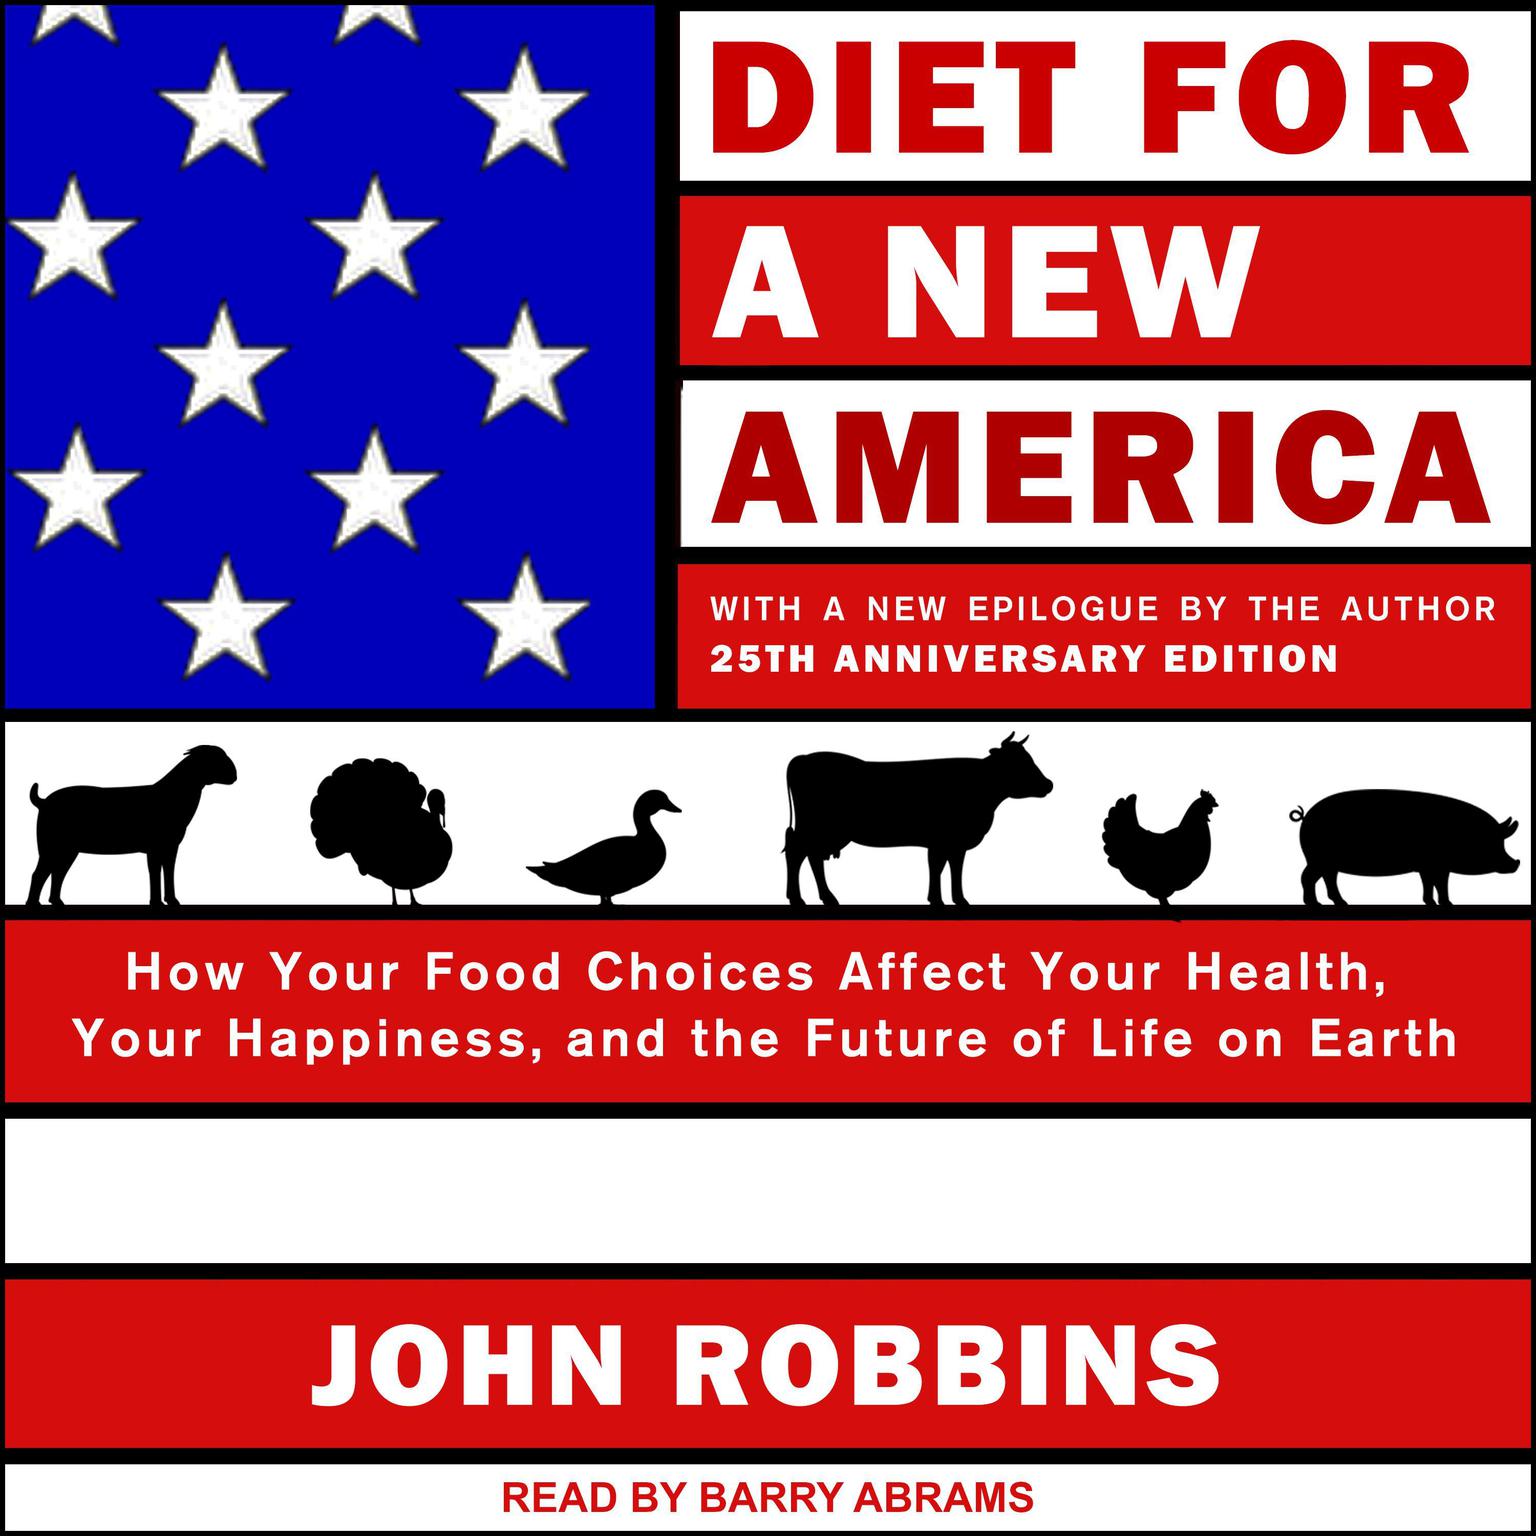 Diet for a New America: How Your Food Choices Affect Your Health, Happiness and the Future of Life on Earth, 25th Anniversary Edition Audiobook, by John Robbins